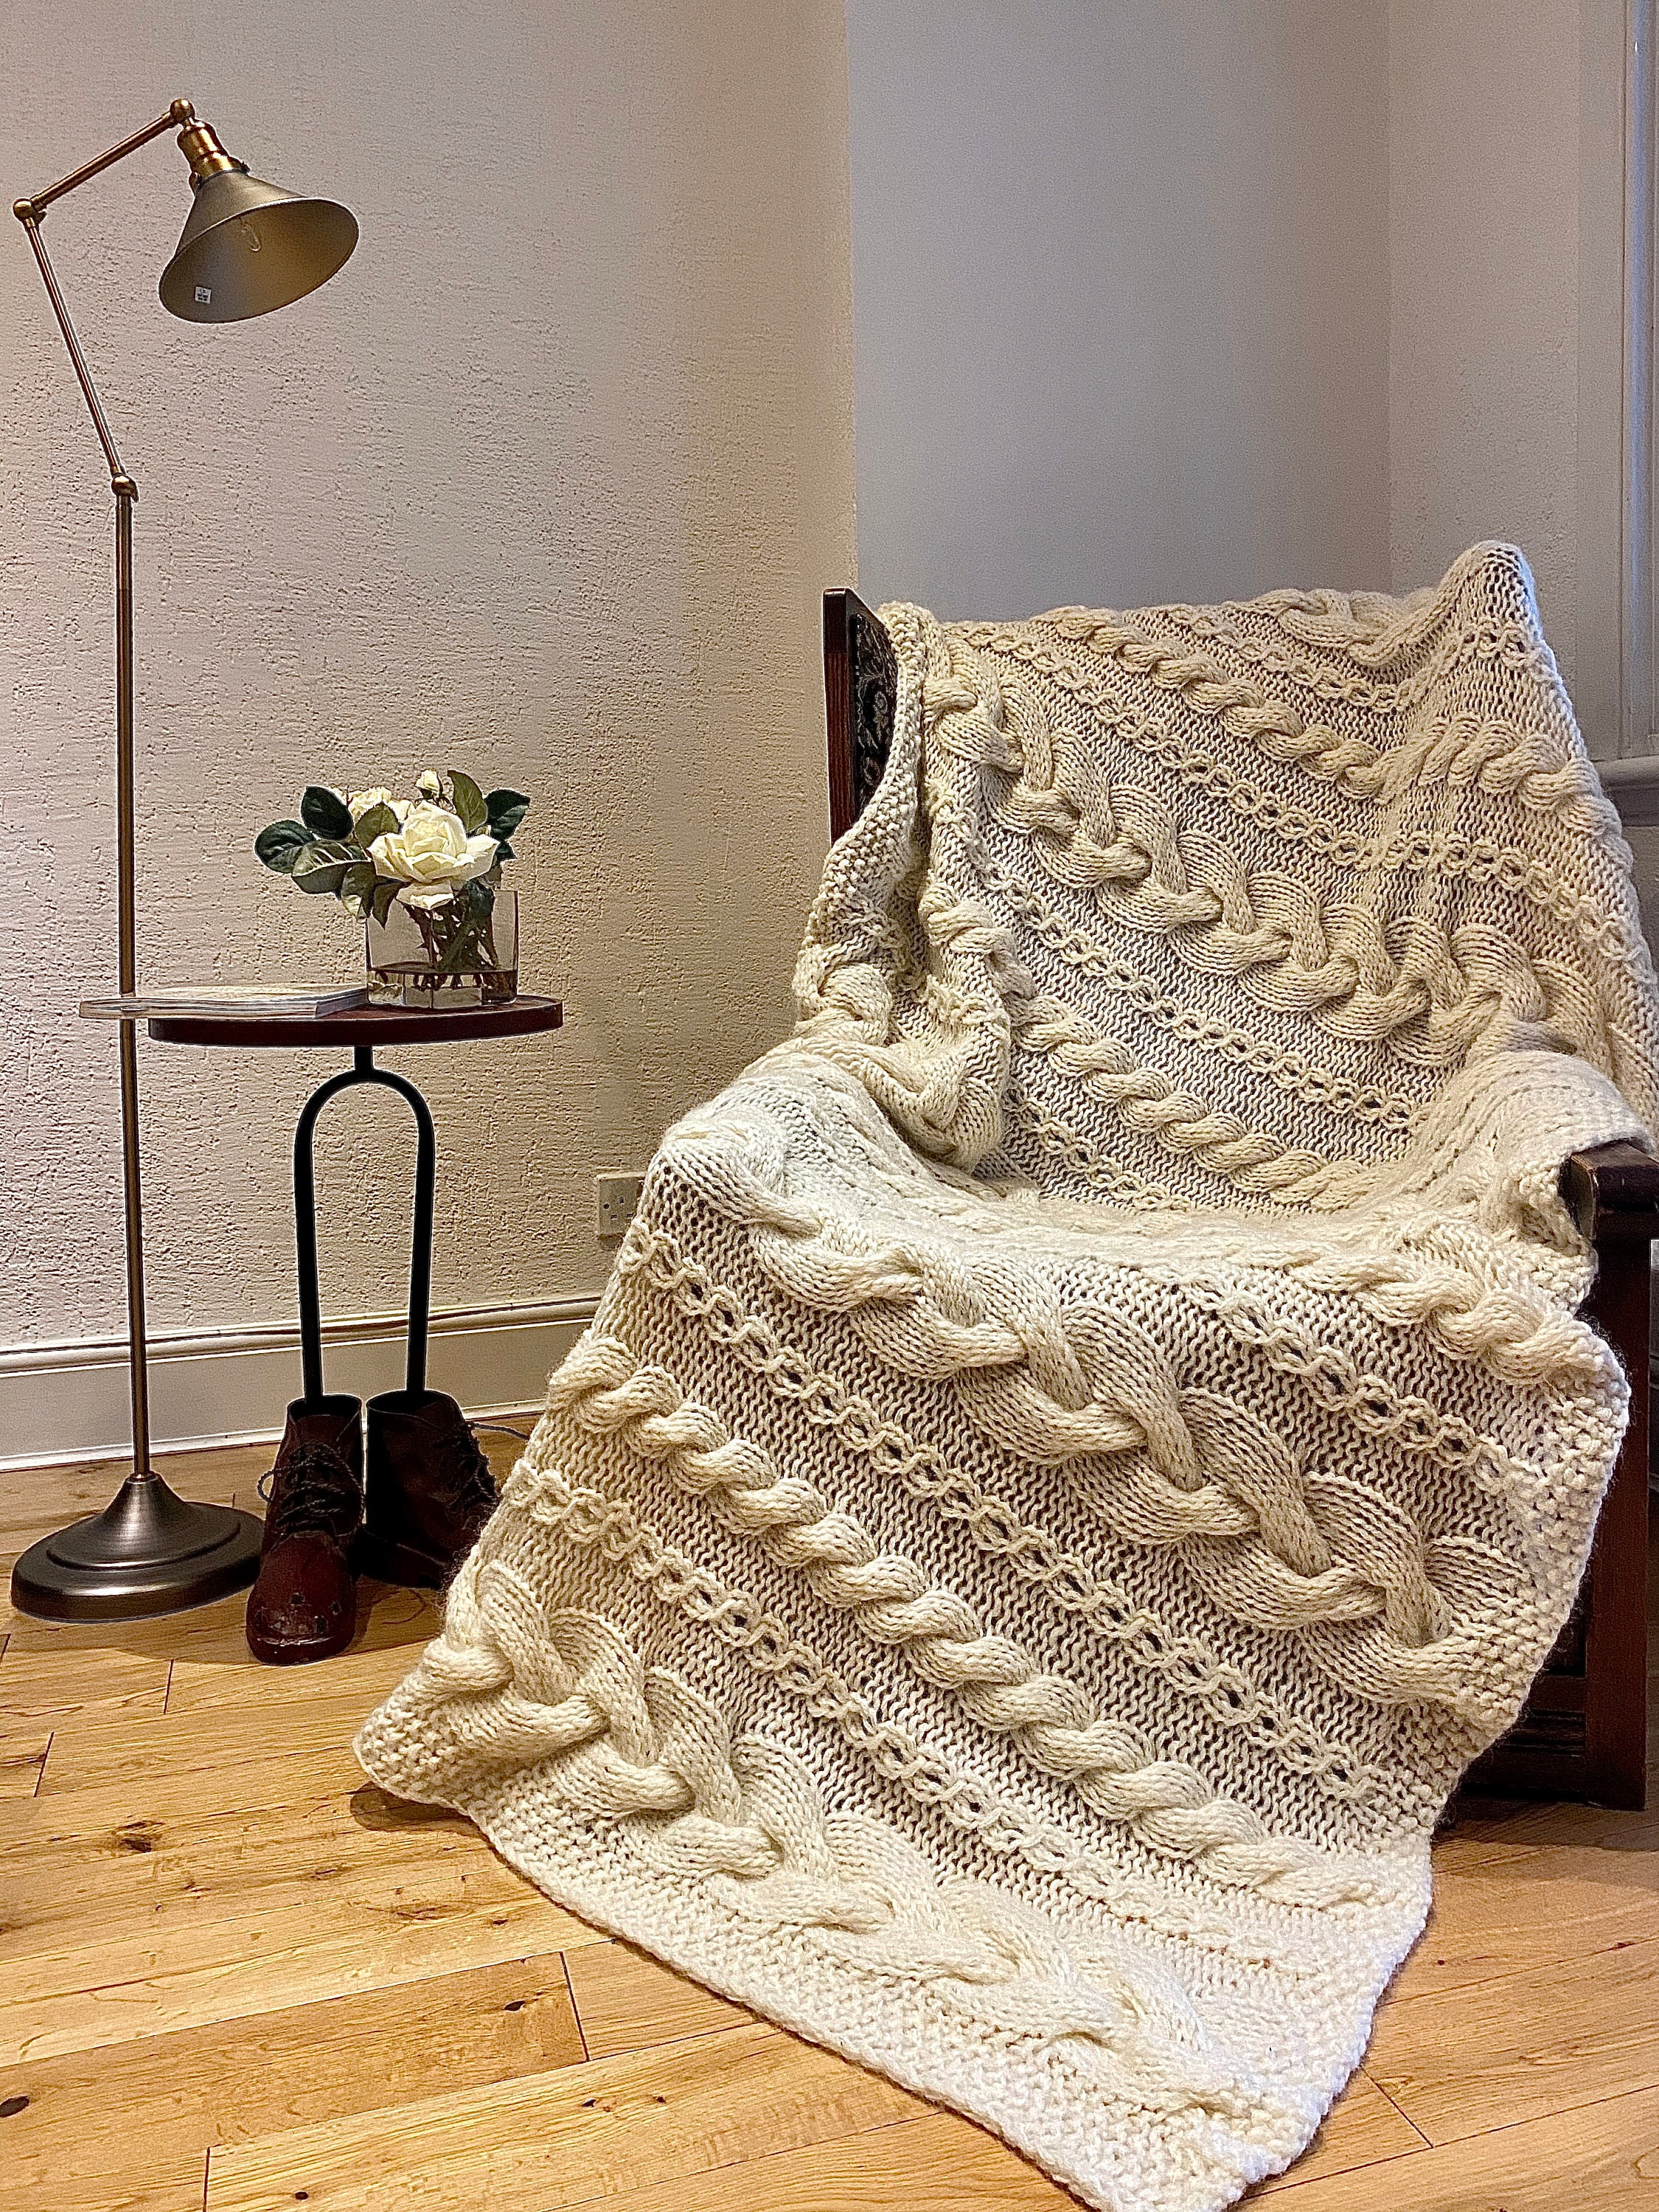 How to Hand Knit a Soft Chunky Blanket  Super Soft Easy to Knit Blanket -  The Everyday Farmhouse